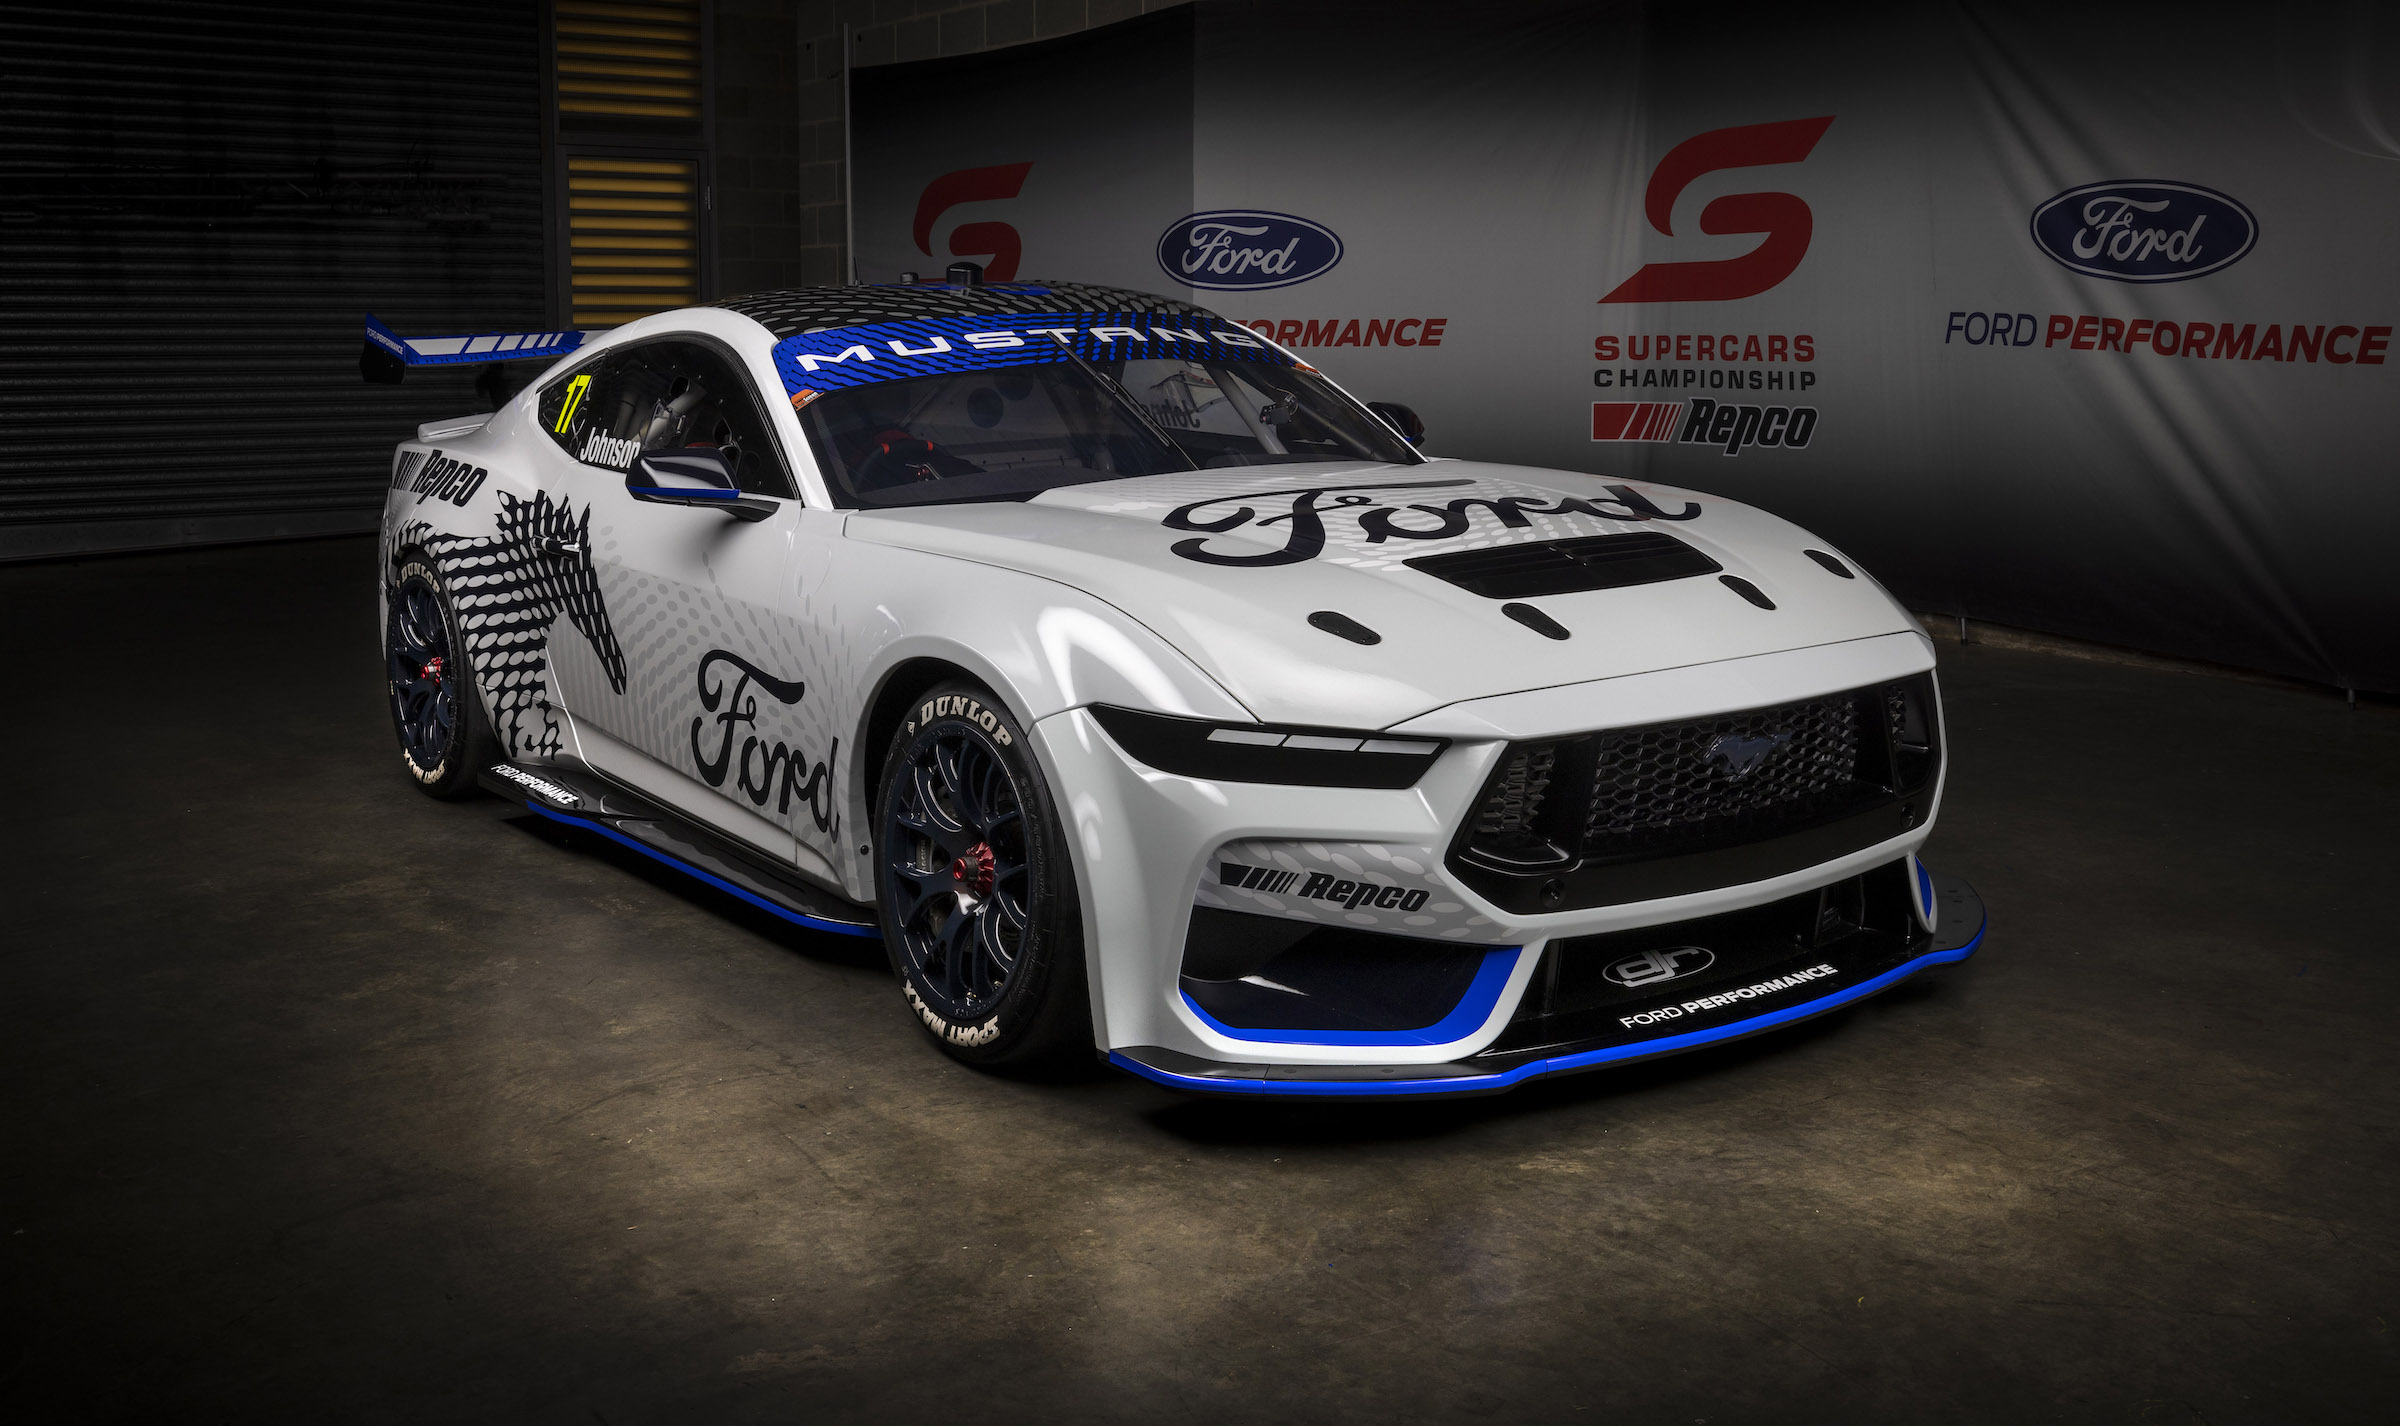 S650 Mustang All-New Ford Mustang (S650) GT Supercars Race Car Revealed at Bathurst 1000 EV-11-22-1J1A0624